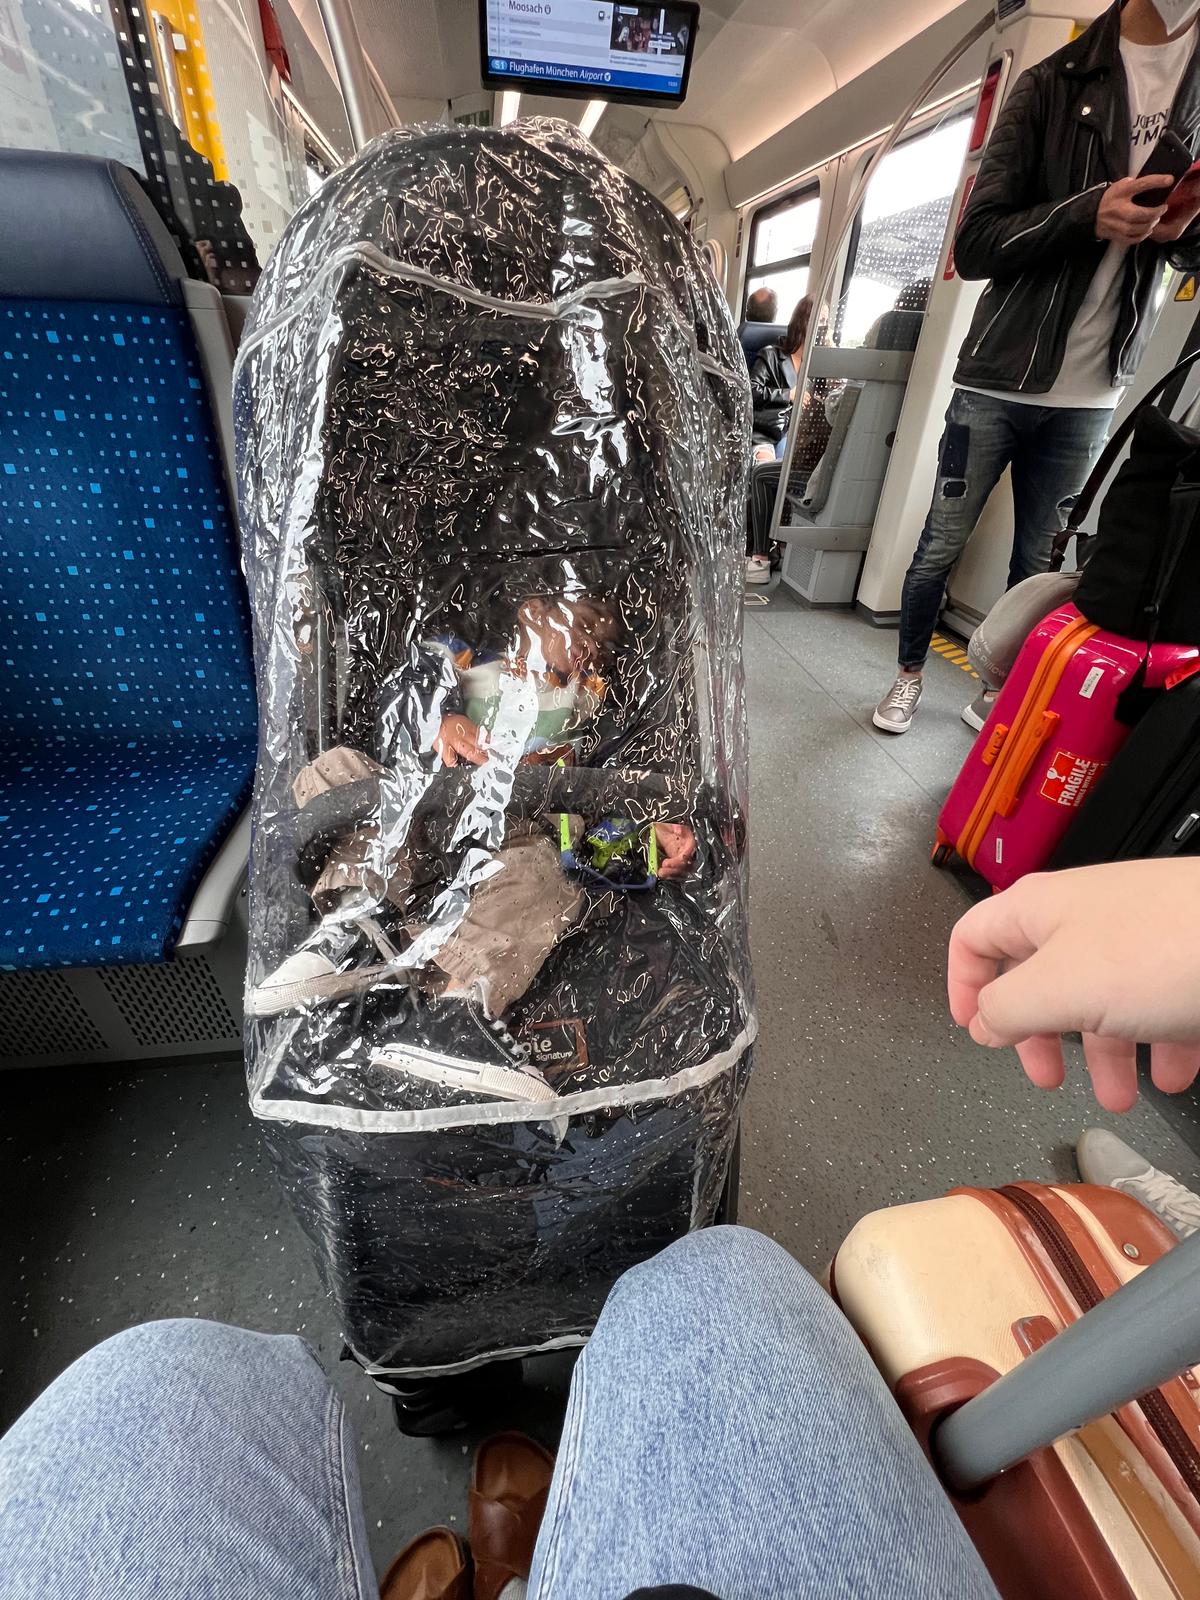 Toddler sleeping in a stroller in the train in Germany